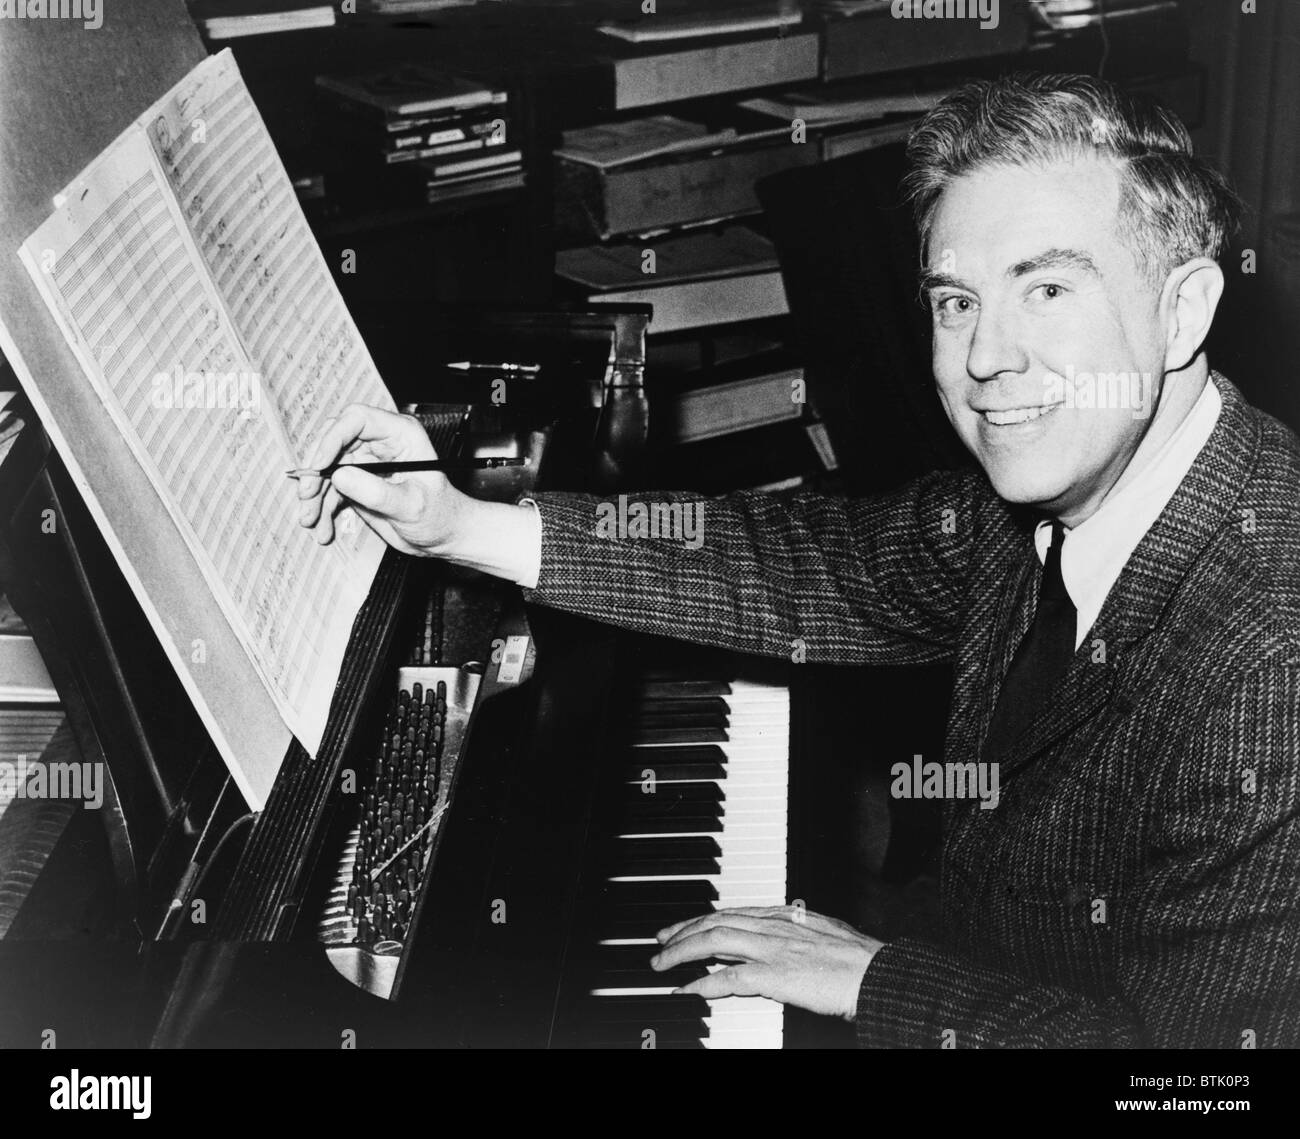 Elliott Carter (b. 1908), American composer seated at piano, editing sheet of music. During his long career, Carter won two Pulitzer Prizes (1960, 1973), a 1993 Grammy and in 2001, Yo-Yo Ma premiered his new CELLO CONCERTO. Stock Photo